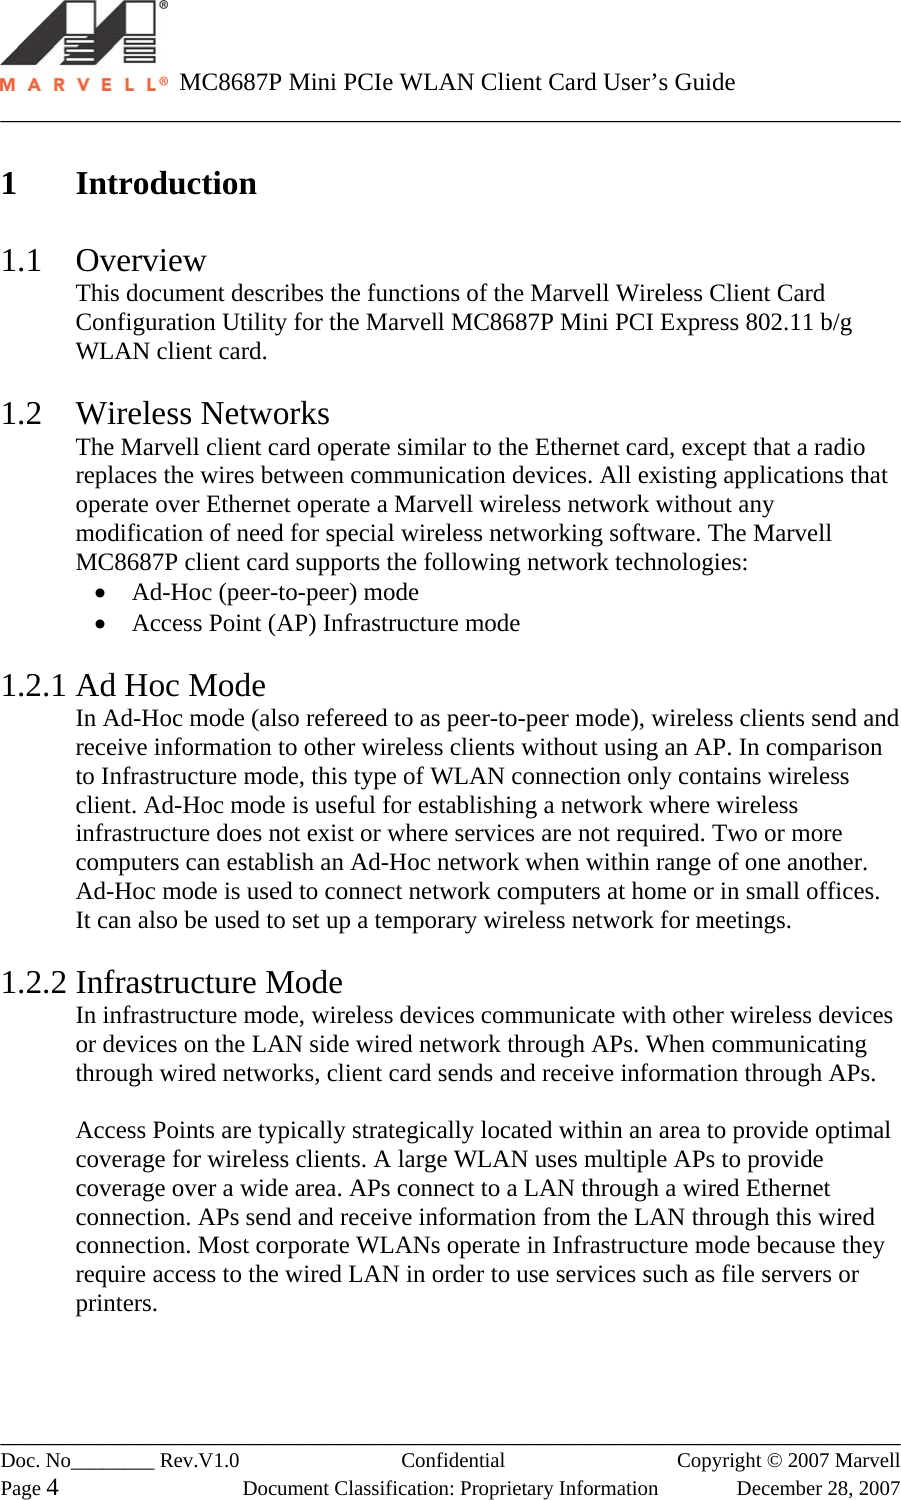   MC8687P Mini PCIe WLAN Client Card User’s Guide ________________________________________________________________________ ________________________________________________________________________ Doc. No________ Rev.V1.0   Confidential  Copyright © 2007 Marvell Page 4  Document Classification: Proprietary Information  December 28, 2007  1 Introduction  1.1 Overview This document describes the functions of the Marvell Wireless Client Card Configuration Utility for the Marvell MC8687P Mini PCI Express 802.11 b/g WLAN client card.  1.2 Wireless Networks The Marvell client card operate similar to the Ethernet card, except that a radio replaces the wires between communication devices. All existing applications that operate over Ethernet operate a Marvell wireless network without any modification of need for special wireless networking software. The Marvell MC8687P client card supports the following network technologies: •  Ad-Hoc (peer-to-peer) mode •  Access Point (AP) Infrastructure mode  1.2.1 Ad Hoc Mode In Ad-Hoc mode (also refereed to as peer-to-peer mode), wireless clients send and receive information to other wireless clients without using an AP. In comparison to Infrastructure mode, this type of WLAN connection only contains wireless client. Ad-Hoc mode is useful for establishing a network where wireless infrastructure does not exist or where services are not required. Two or more computers can establish an Ad-Hoc network when within range of one another. Ad-Hoc mode is used to connect network computers at home or in small offices. It can also be used to set up a temporary wireless network for meetings.  1.2.2 Infrastructure Mode In infrastructure mode, wireless devices communicate with other wireless devices or devices on the LAN side wired network through APs. When communicating through wired networks, client card sends and receive information through APs.  Access Points are typically strategically located within an area to provide optimal coverage for wireless clients. A large WLAN uses multiple APs to provide coverage over a wide area. APs connect to a LAN through a wired Ethernet connection. APs send and receive information from the LAN through this wired connection. Most corporate WLANs operate in Infrastructure mode because they require access to the wired LAN in order to use services such as file servers or printers. 